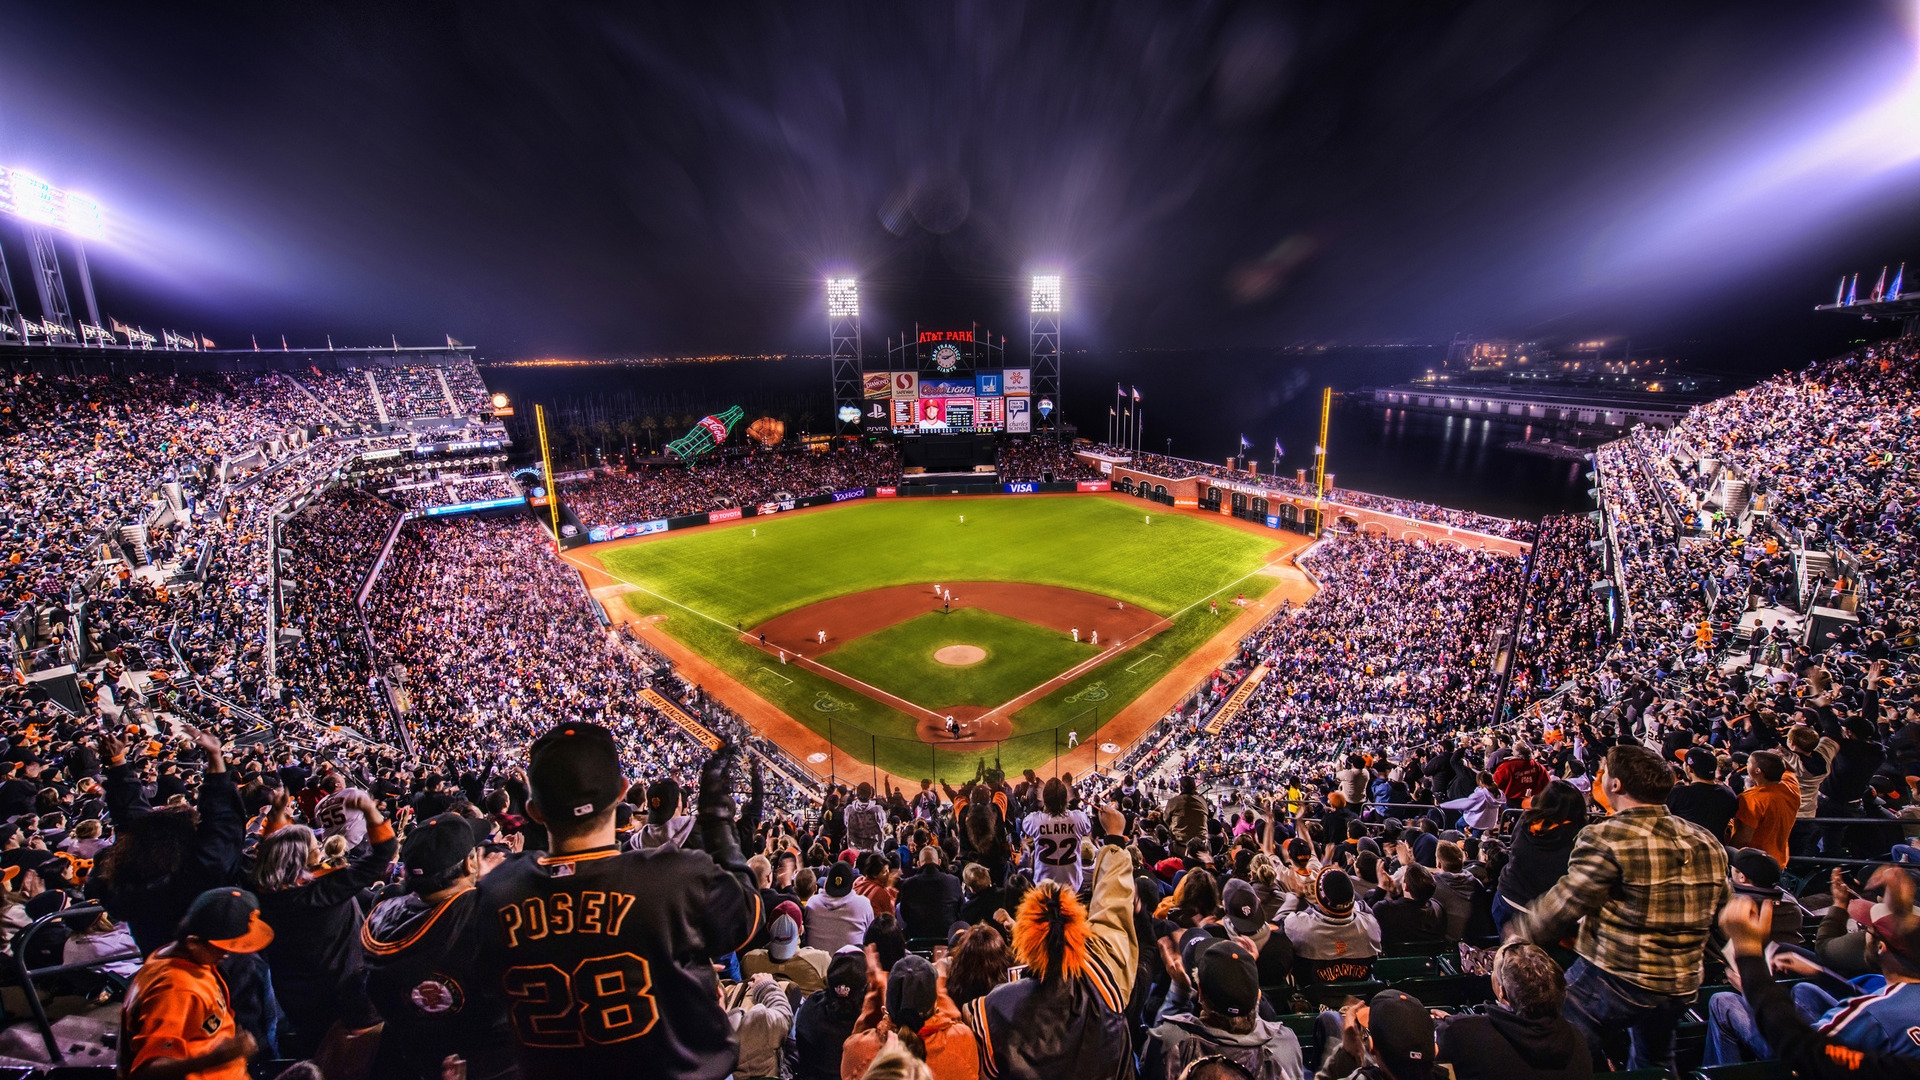 AT&T Park for 1920 x 1080 HDTV 1080p resolution